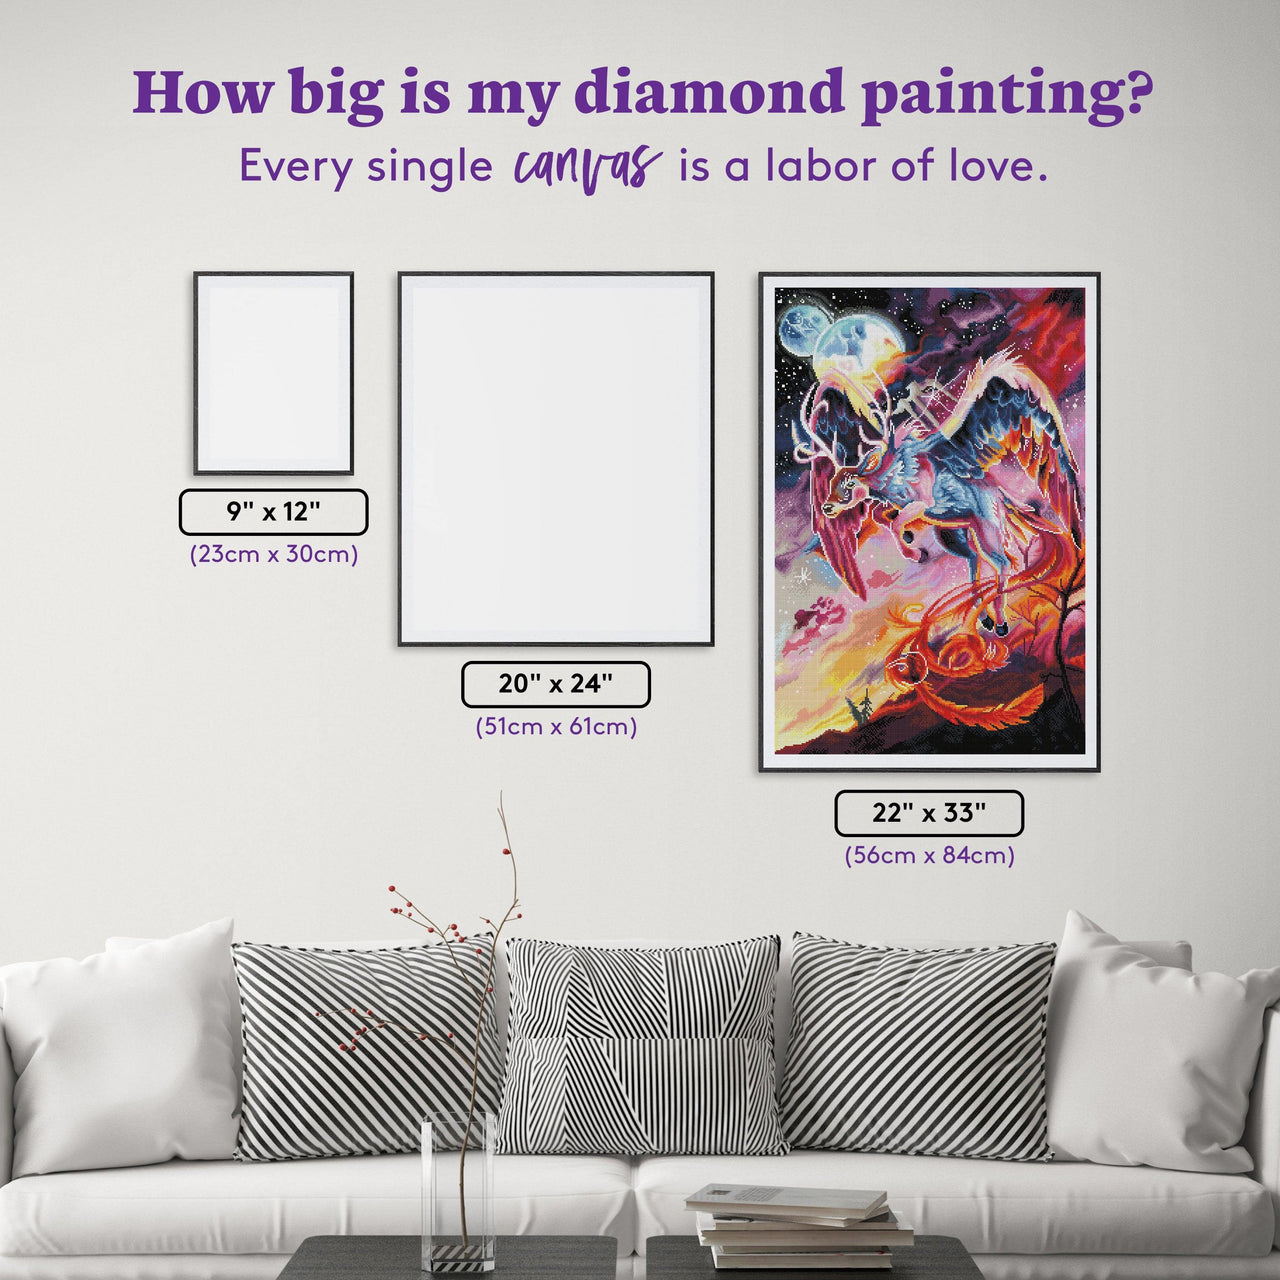 Diamond Painting Peryton 22" x 33″ (56cm x 84cm) / Square with 53 Colors including 4 ABs / 73,372